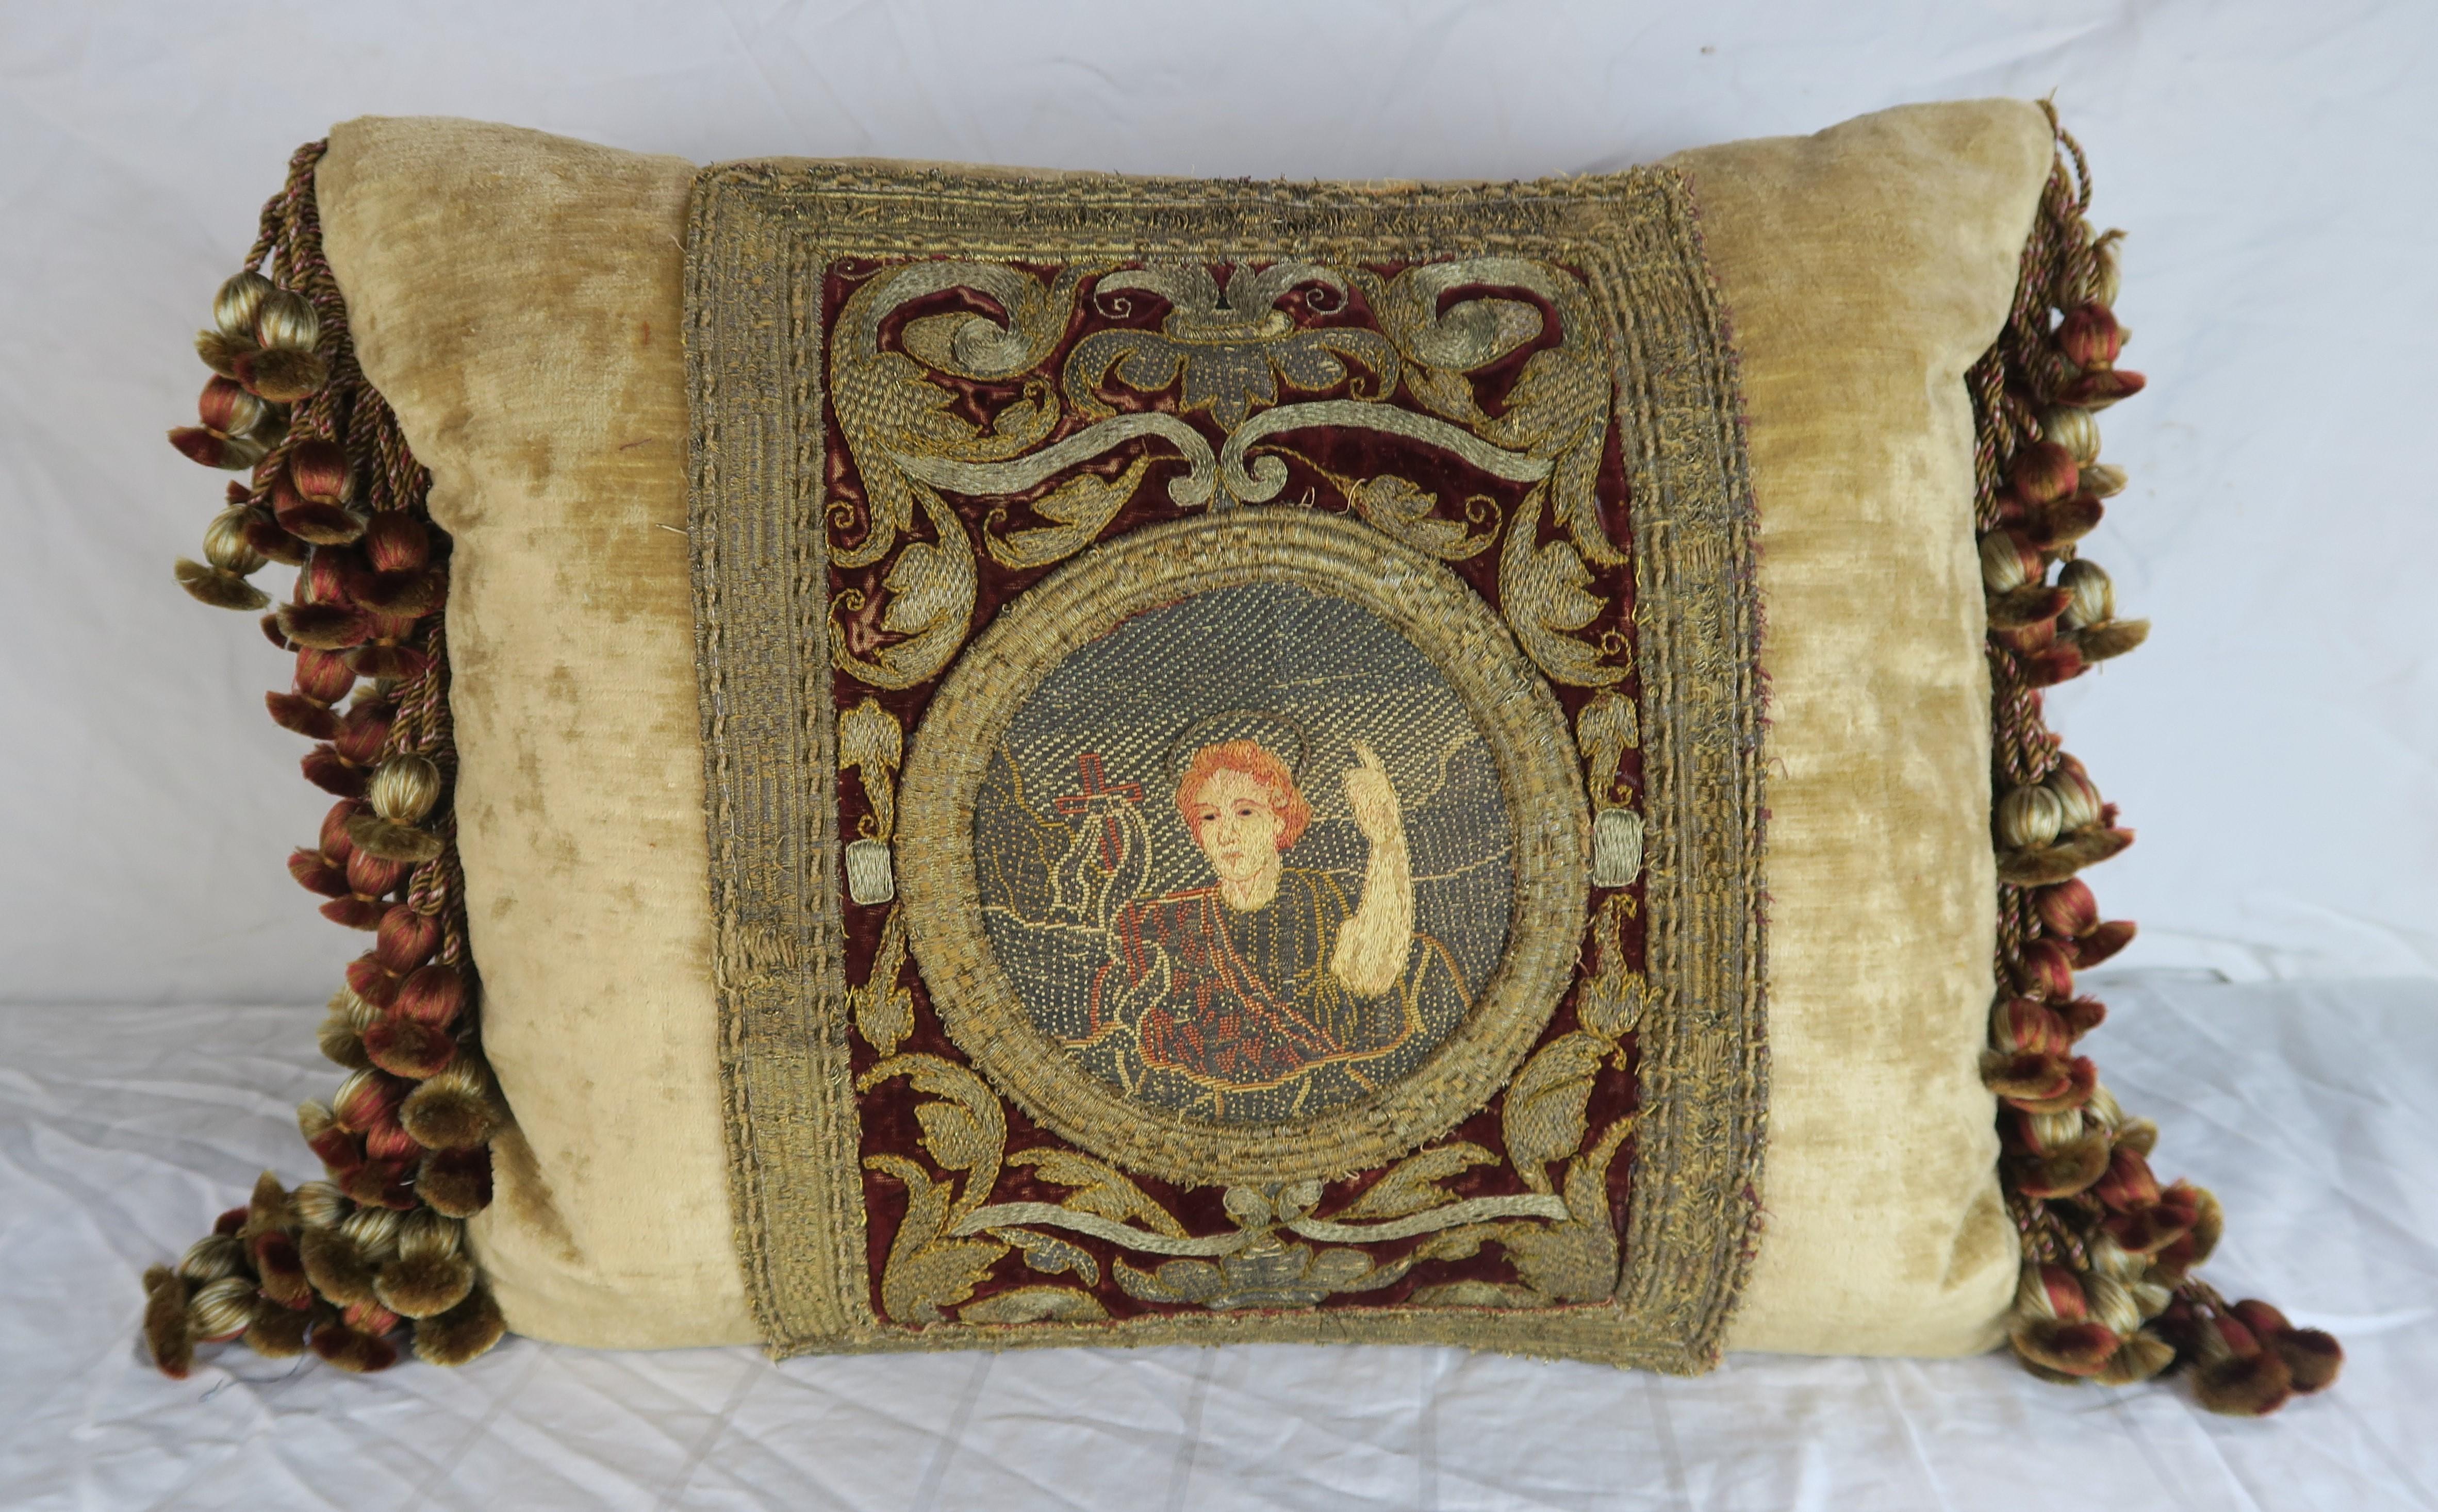 Pair of custom Melissa Levinson designed pillows made with 18th century metallic gold and silver embroidered silk velvet panels with incredibly fine embroidered Saints. The panels are framed with contemporary golden colored linen velvet. Multi